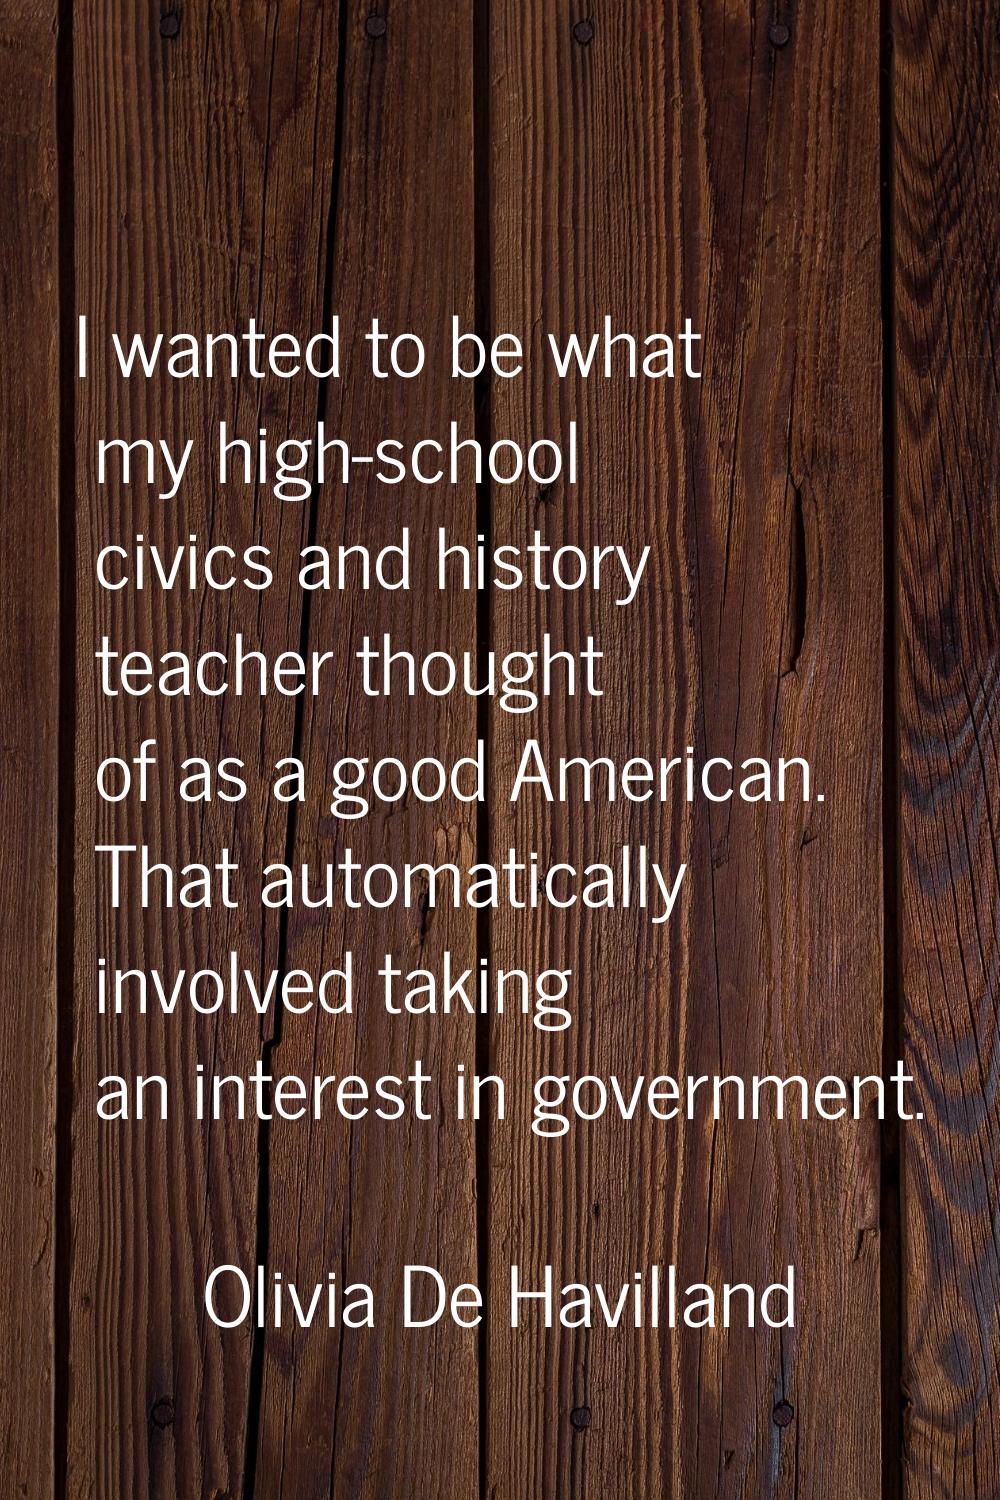 I wanted to be what my high-school civics and history teacher thought of as a good American. That a